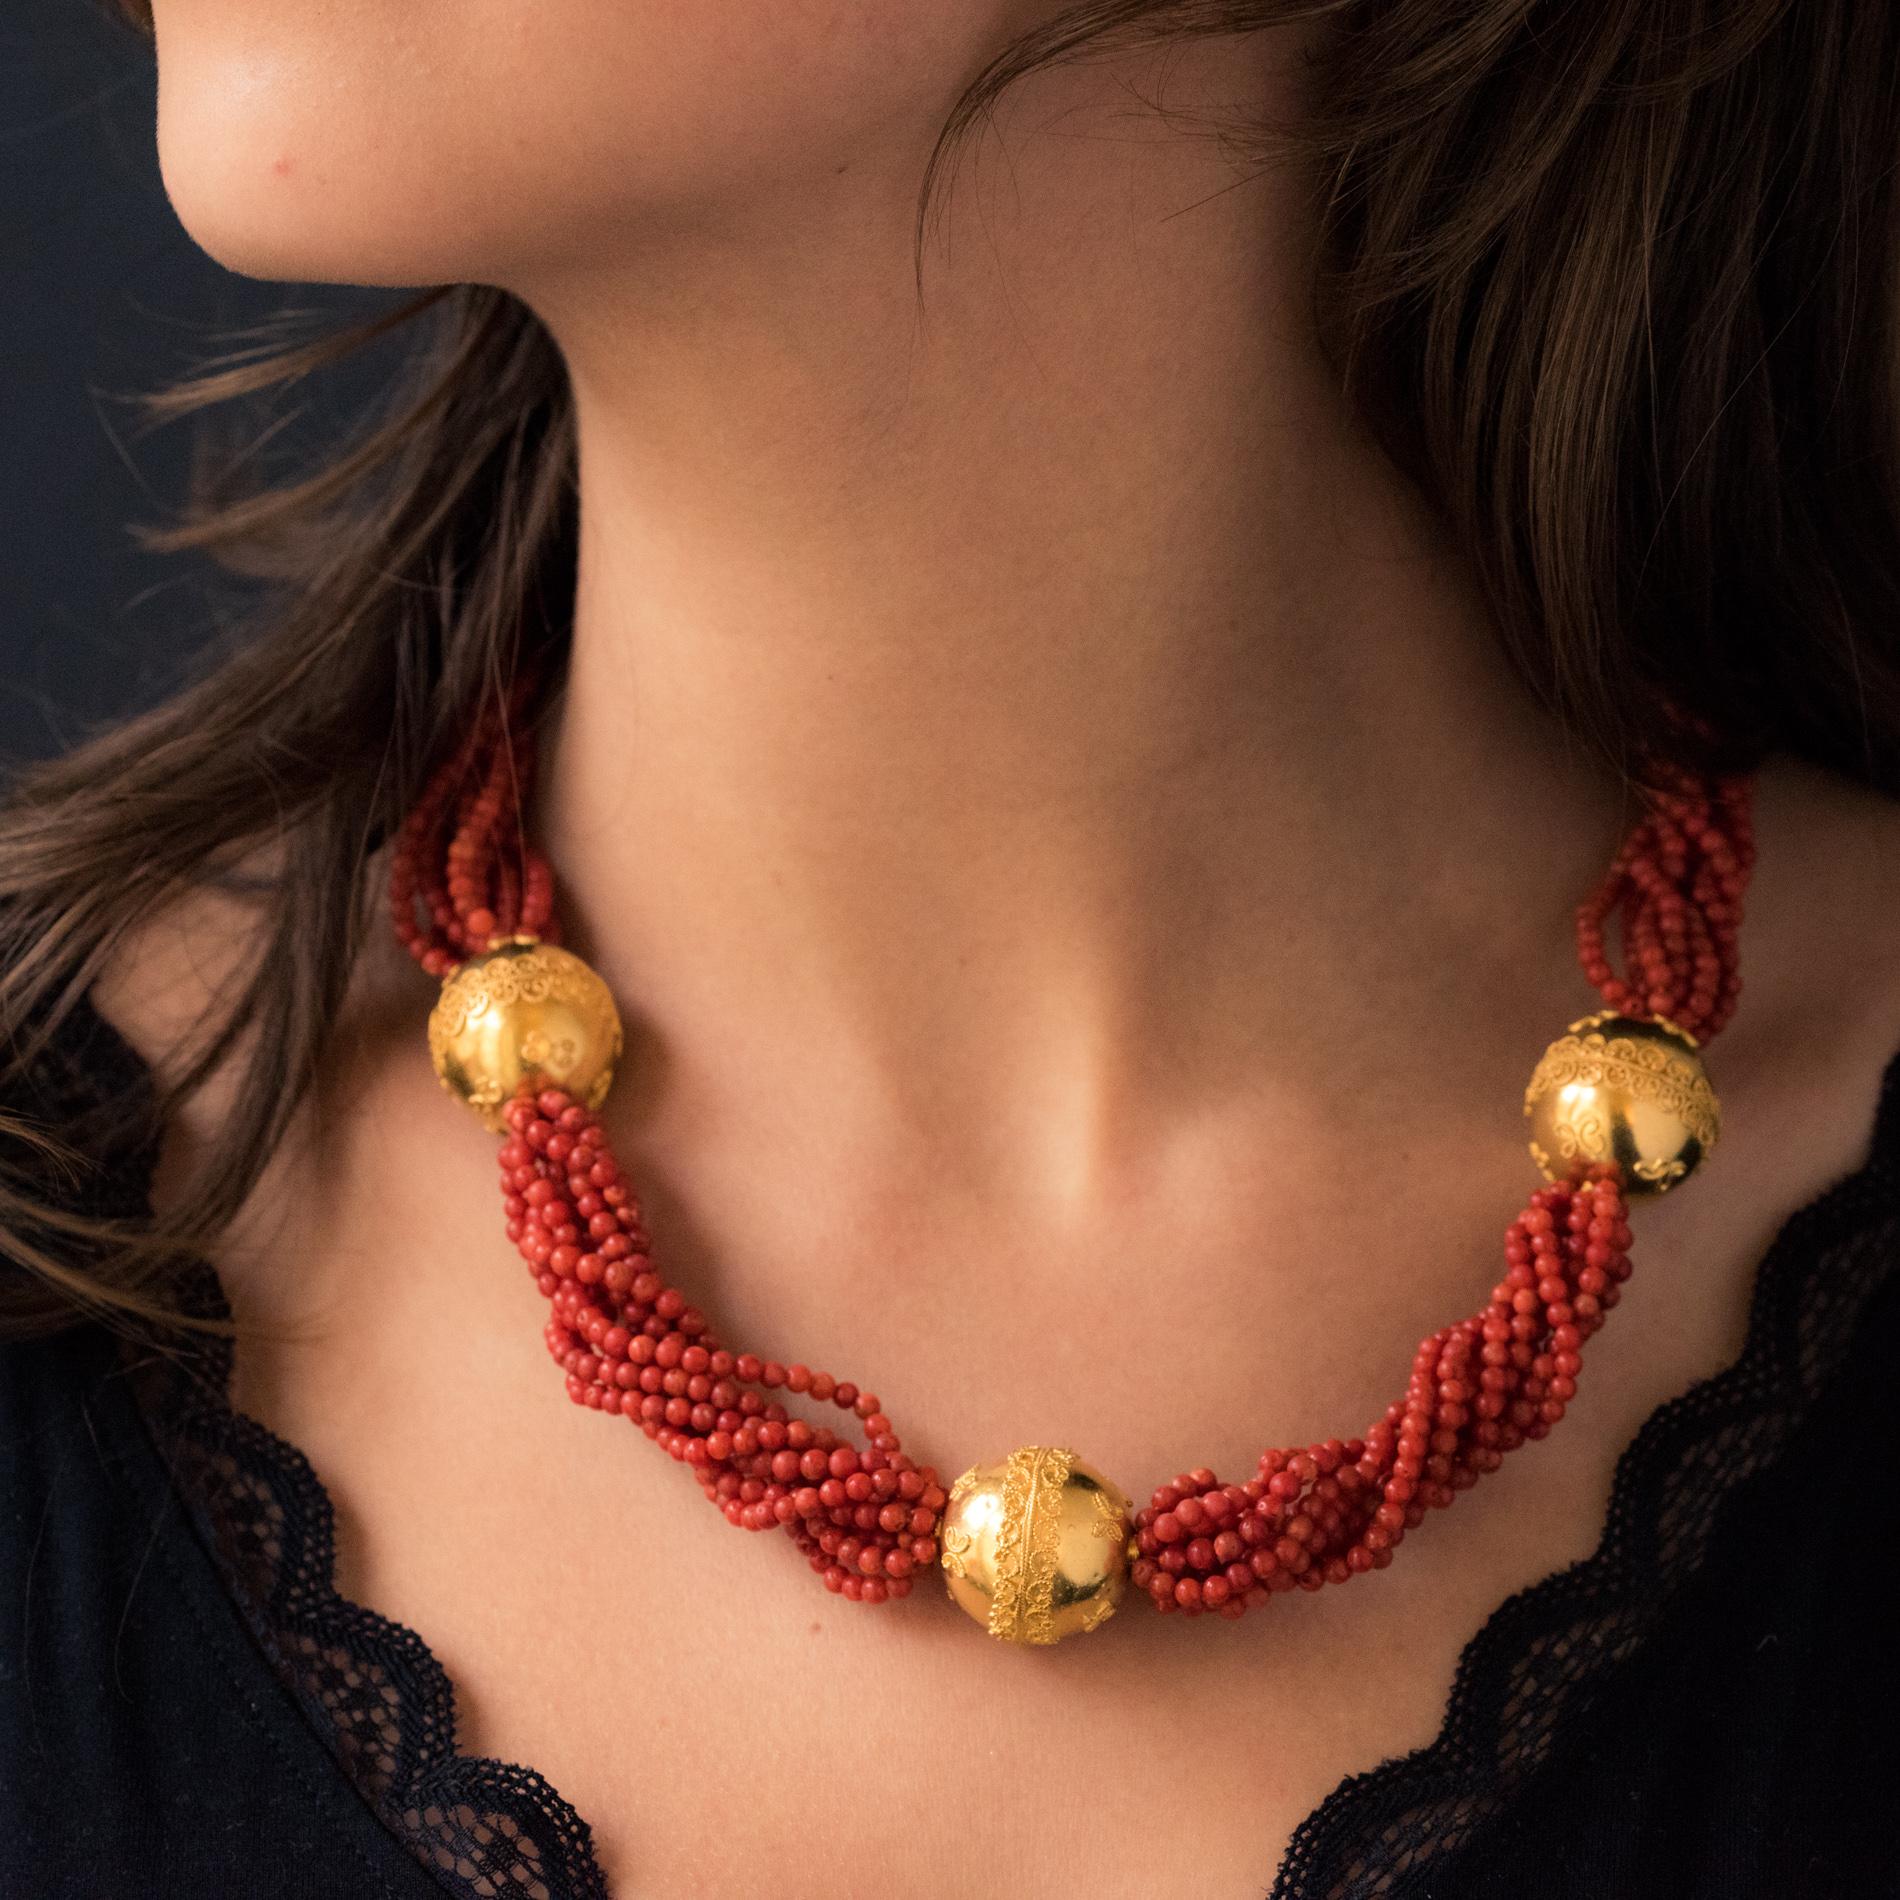 Necklace in coral and 18 karat yellow gold.
This necklace is made up of 10 rows of red coral pearls, separated by 3 large gold pearls, decorated with filigree decorations on the wall. The clasp is a staple.
Length: 52 cm, width: 1.5 cm